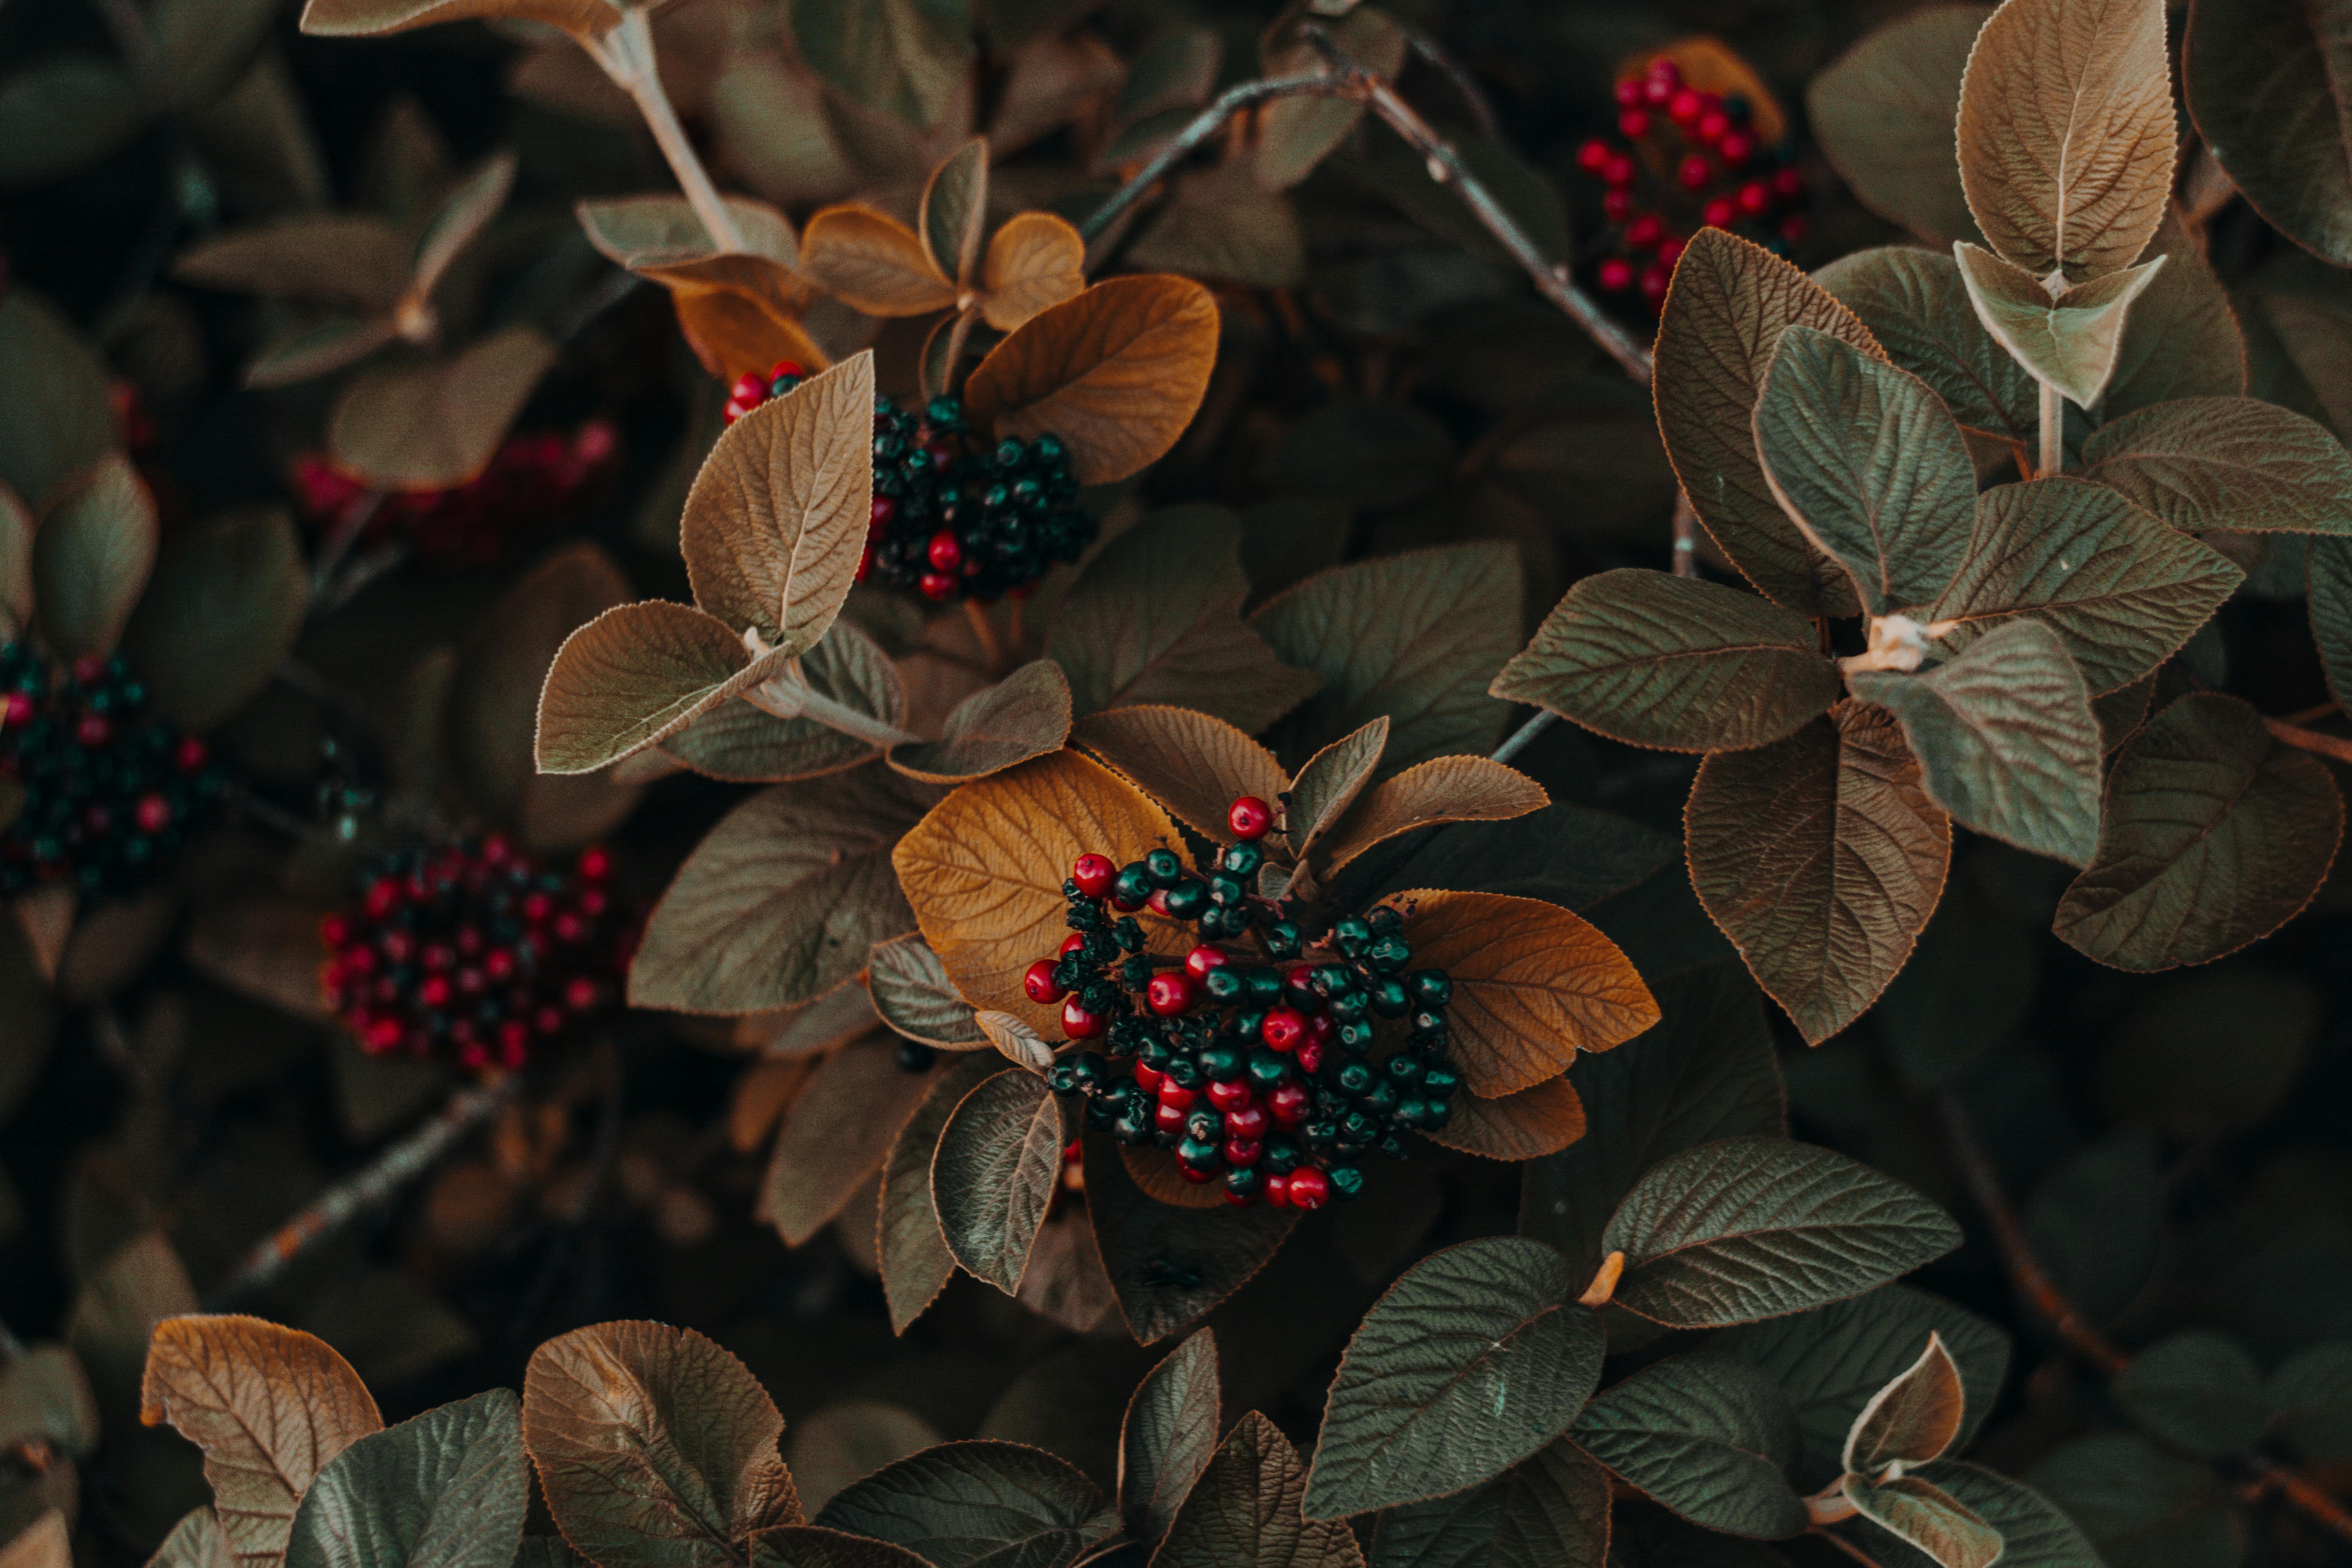 Free 4K Wallpapers: 50,000+ HD Backgrounds for Your PC or Desktop · Pexels  · Free Stock Photos